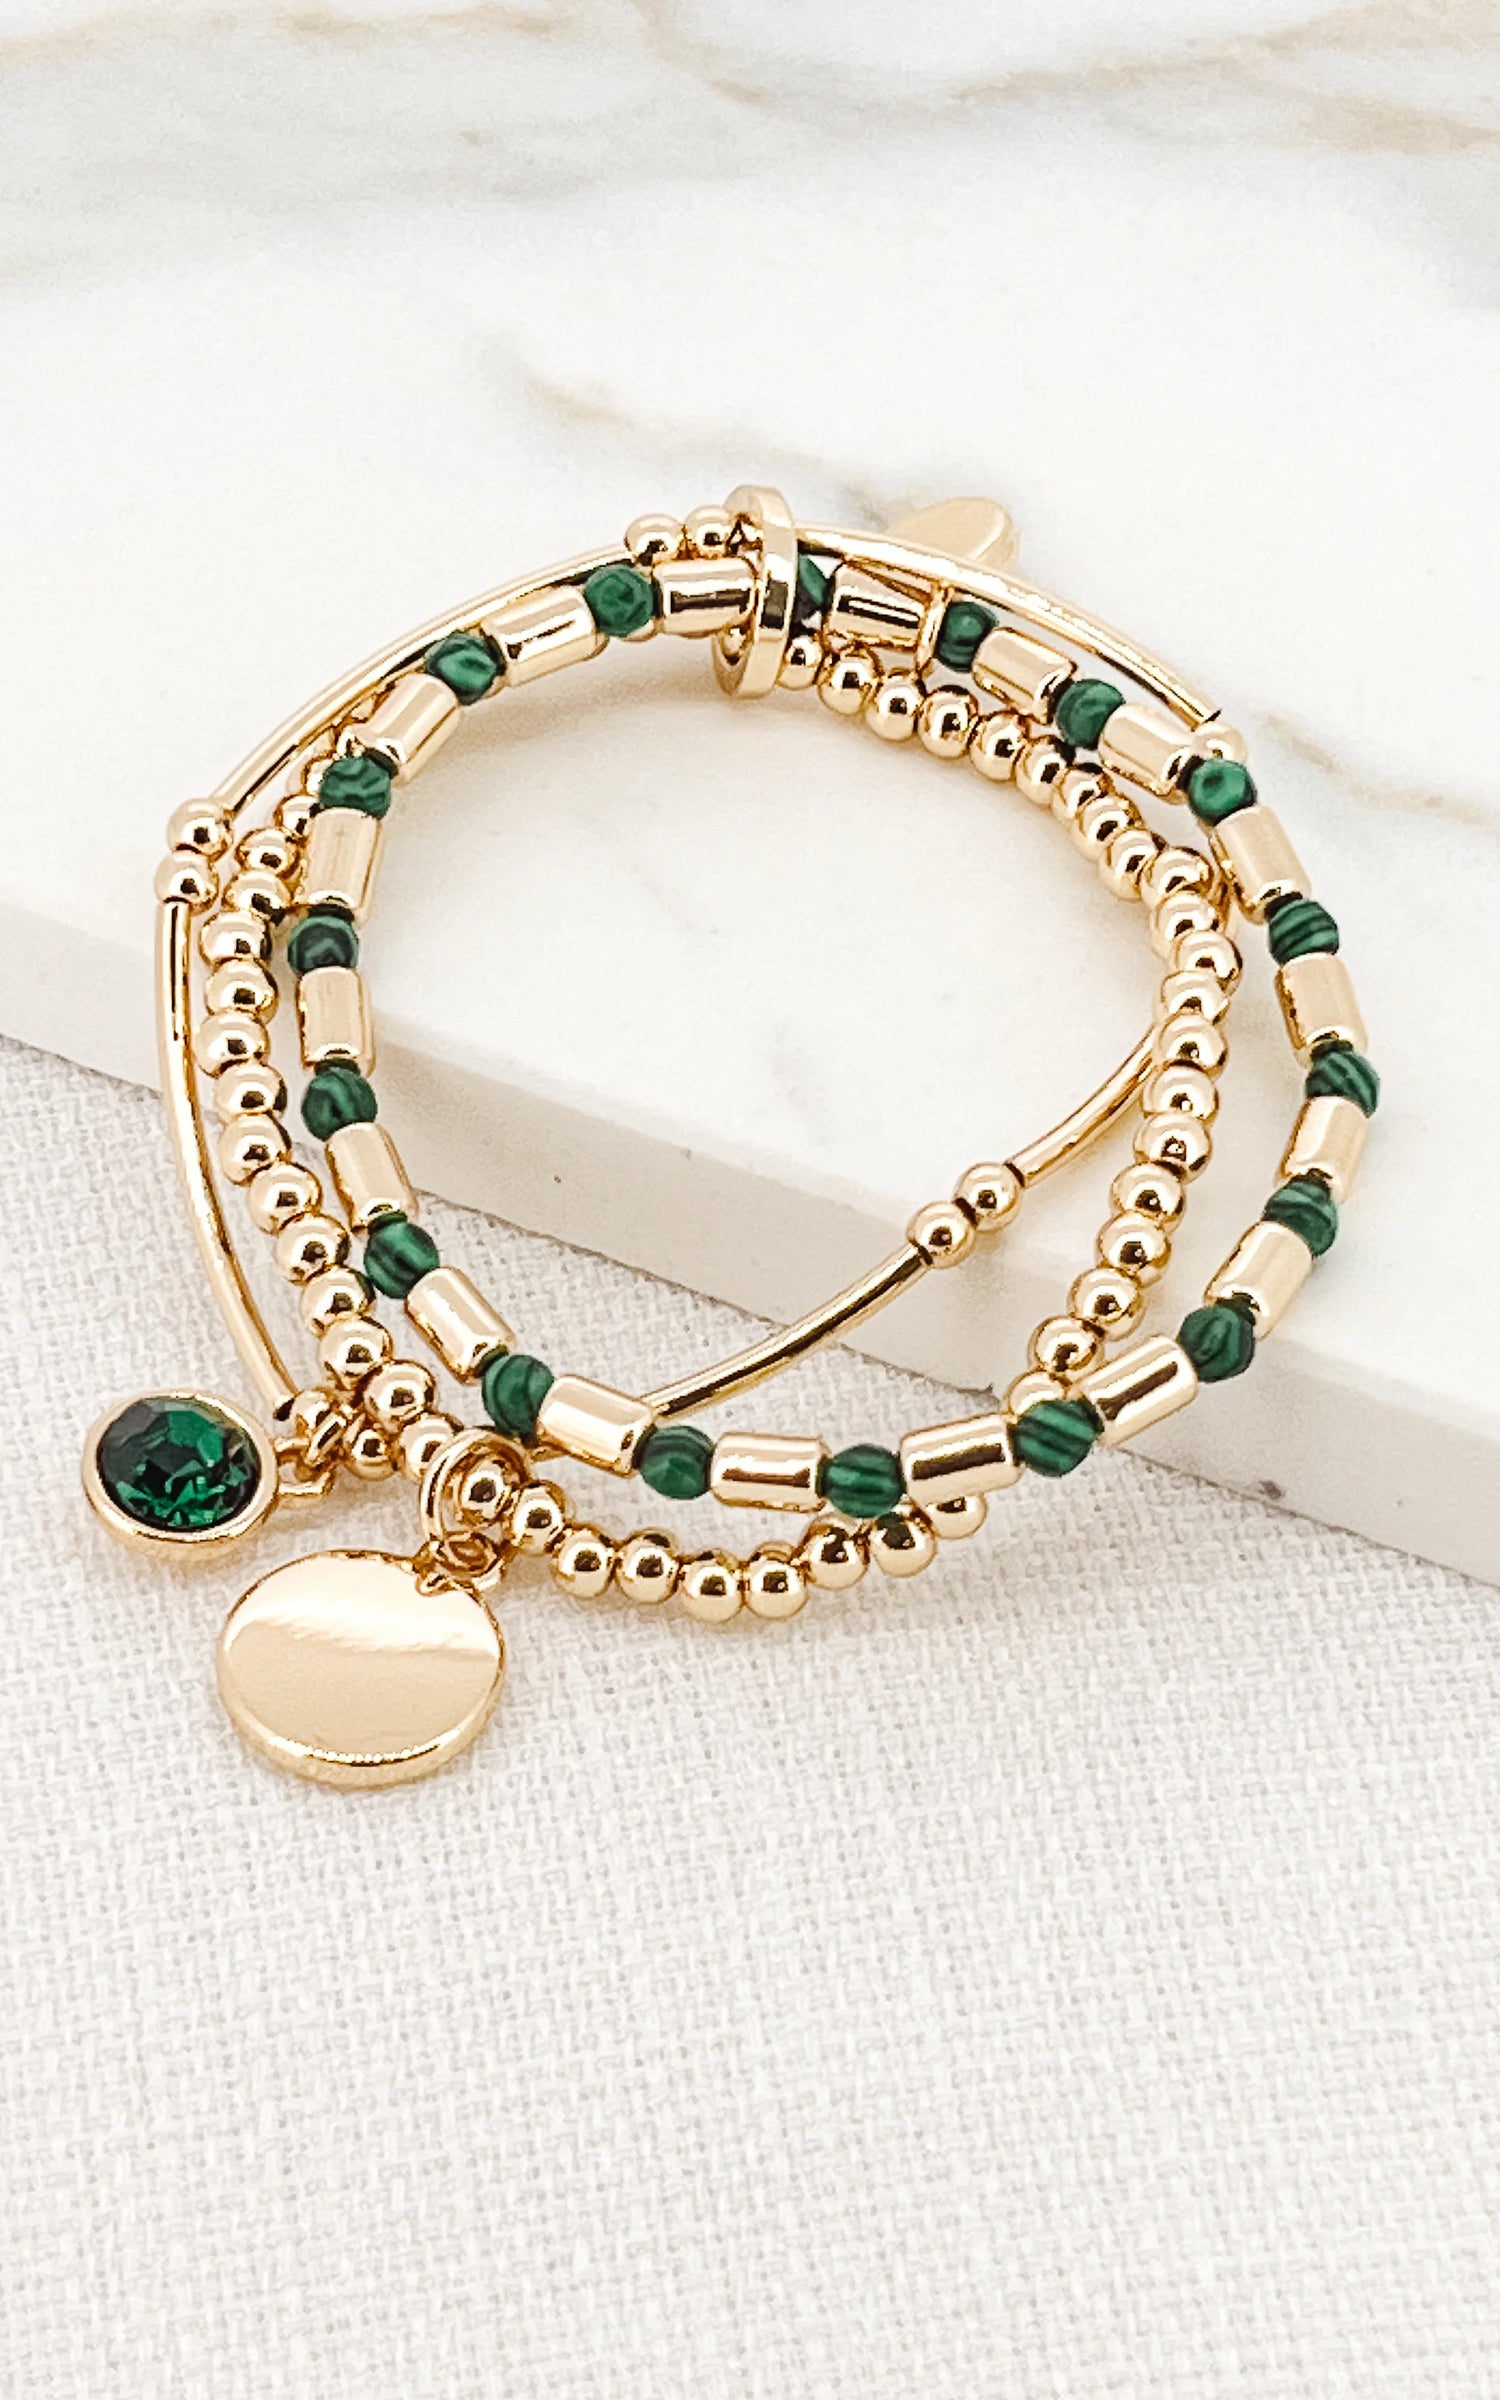 Triple Layer Stretch Bracelet With Green Cristals And Charms